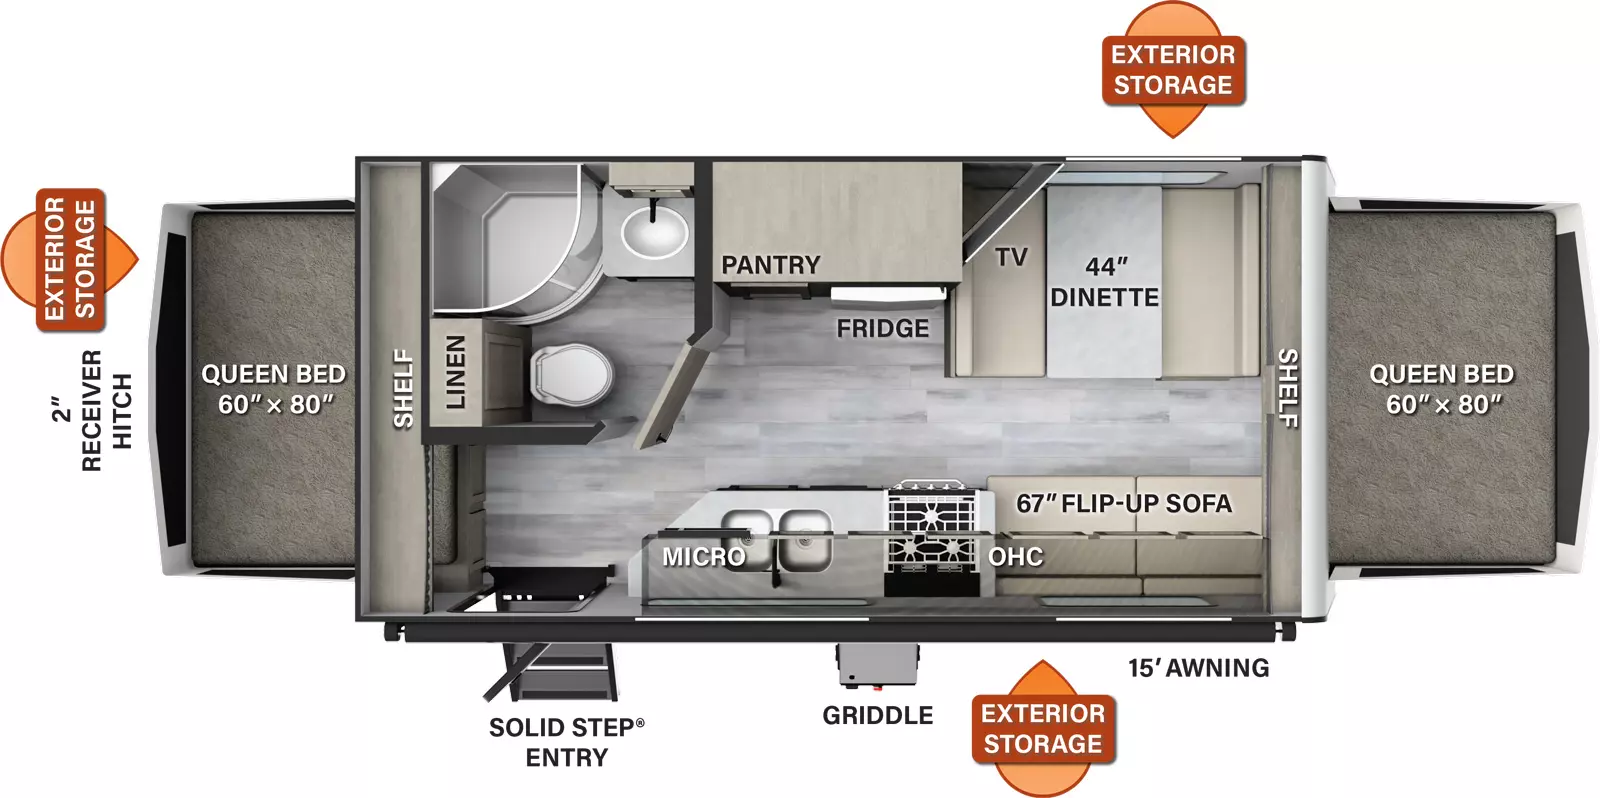 The 19 has no slide outs and one entry door. Exterior features include a 15 foot awning, griddle, exterior storage on both sides and rear, and 2 inch receiver hitch. Interior layout from front to back: front queen tent bed with shelf above; off-door side dinette, TV, refrigerator, pantry and side aisle bathroom; door side flip-up sofa, overhead cabinets, cooktop, microwave, sink and entry; rear queen tent bed with shelf above.